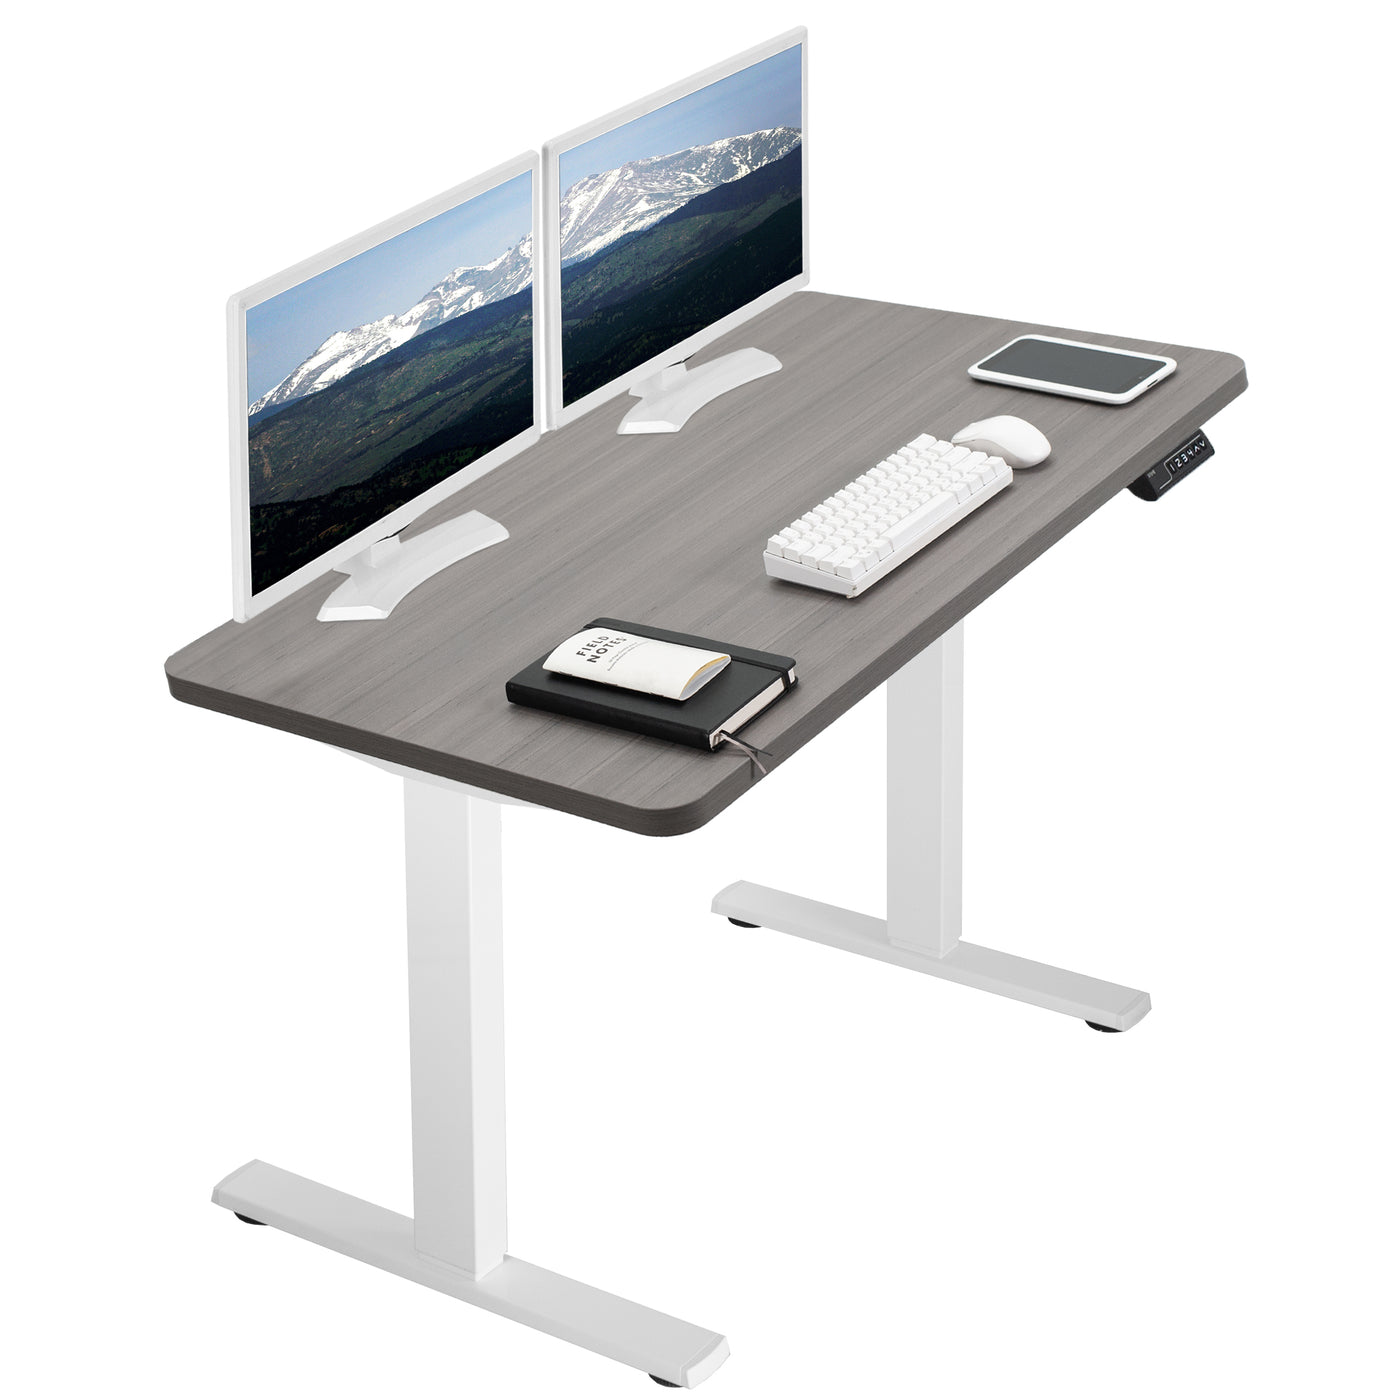 Sturdy ergonomic sit or stand active desk workstation with adjustable height using smart control panel.